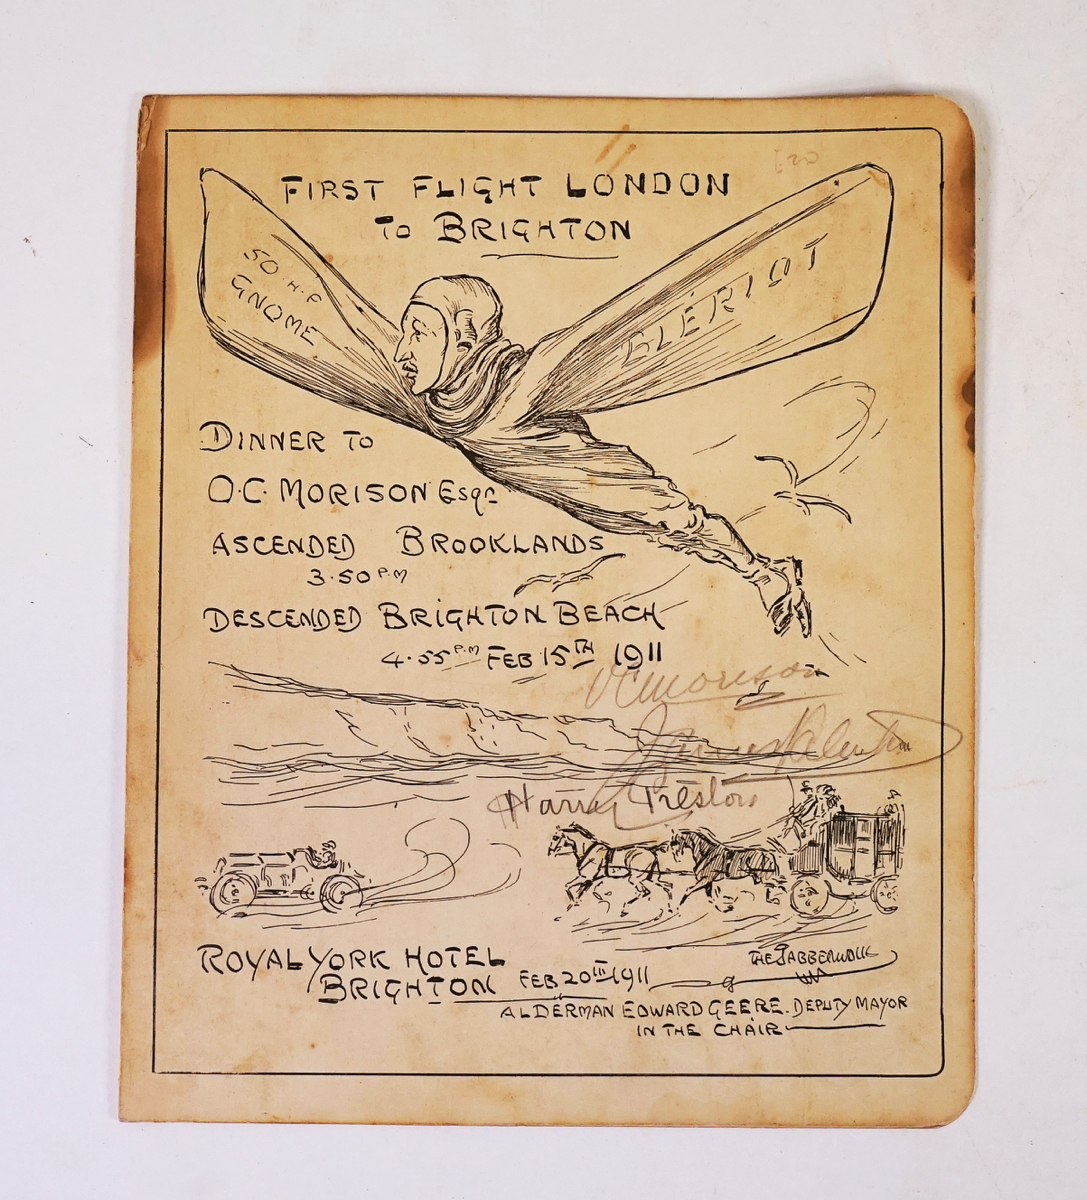 AVIATION - Menu commemorating the first flight from London to Brighton.